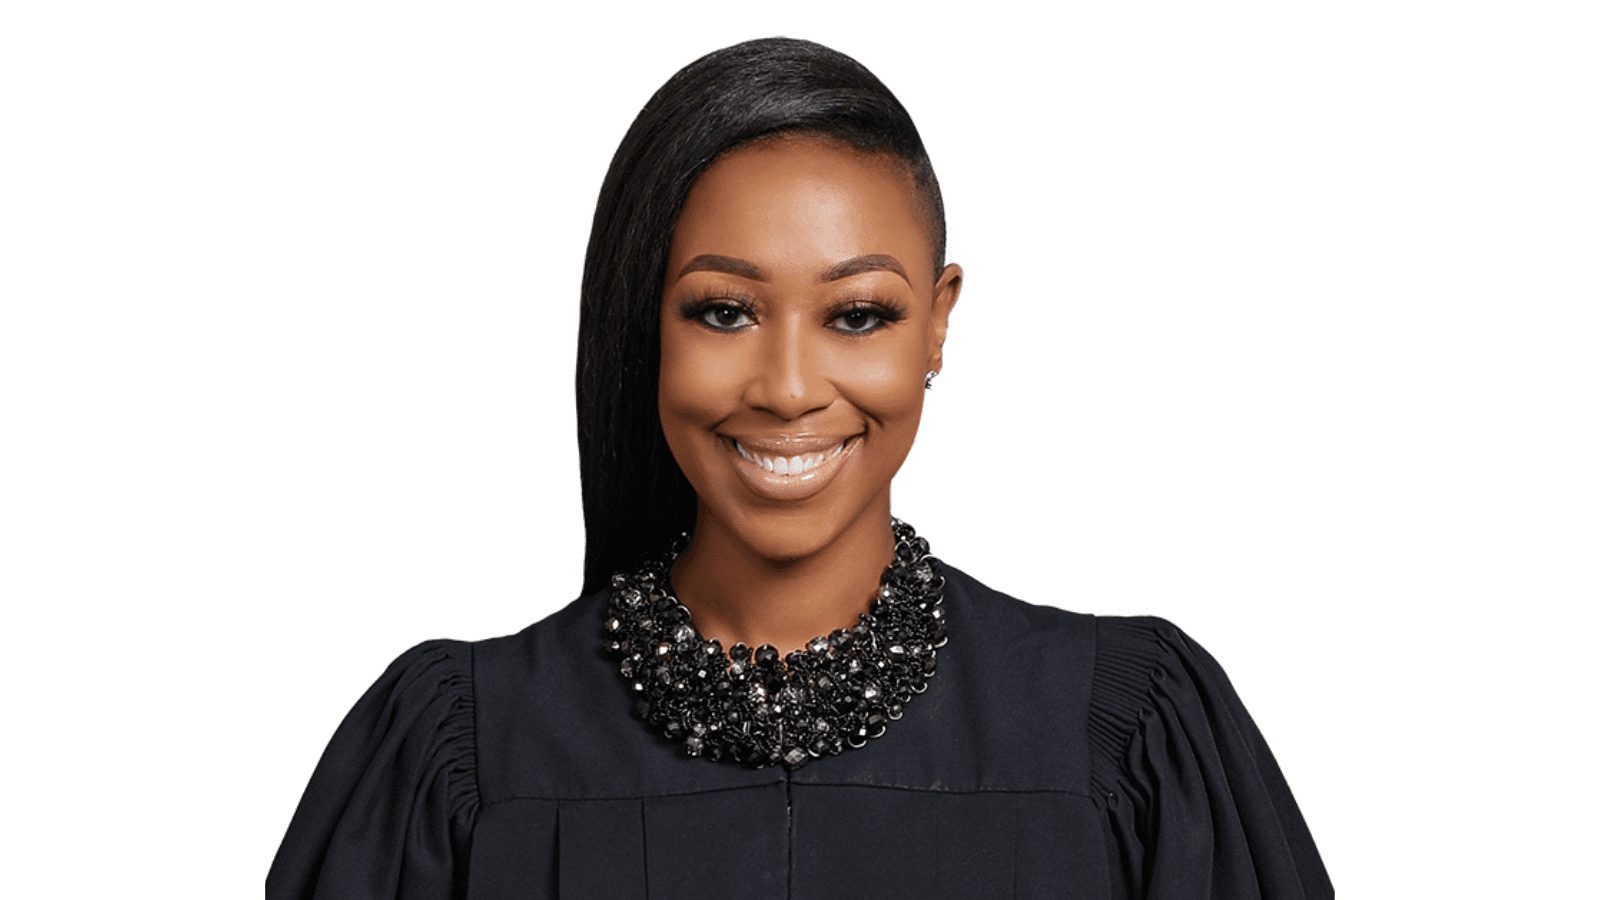 District Judge Amber Givens